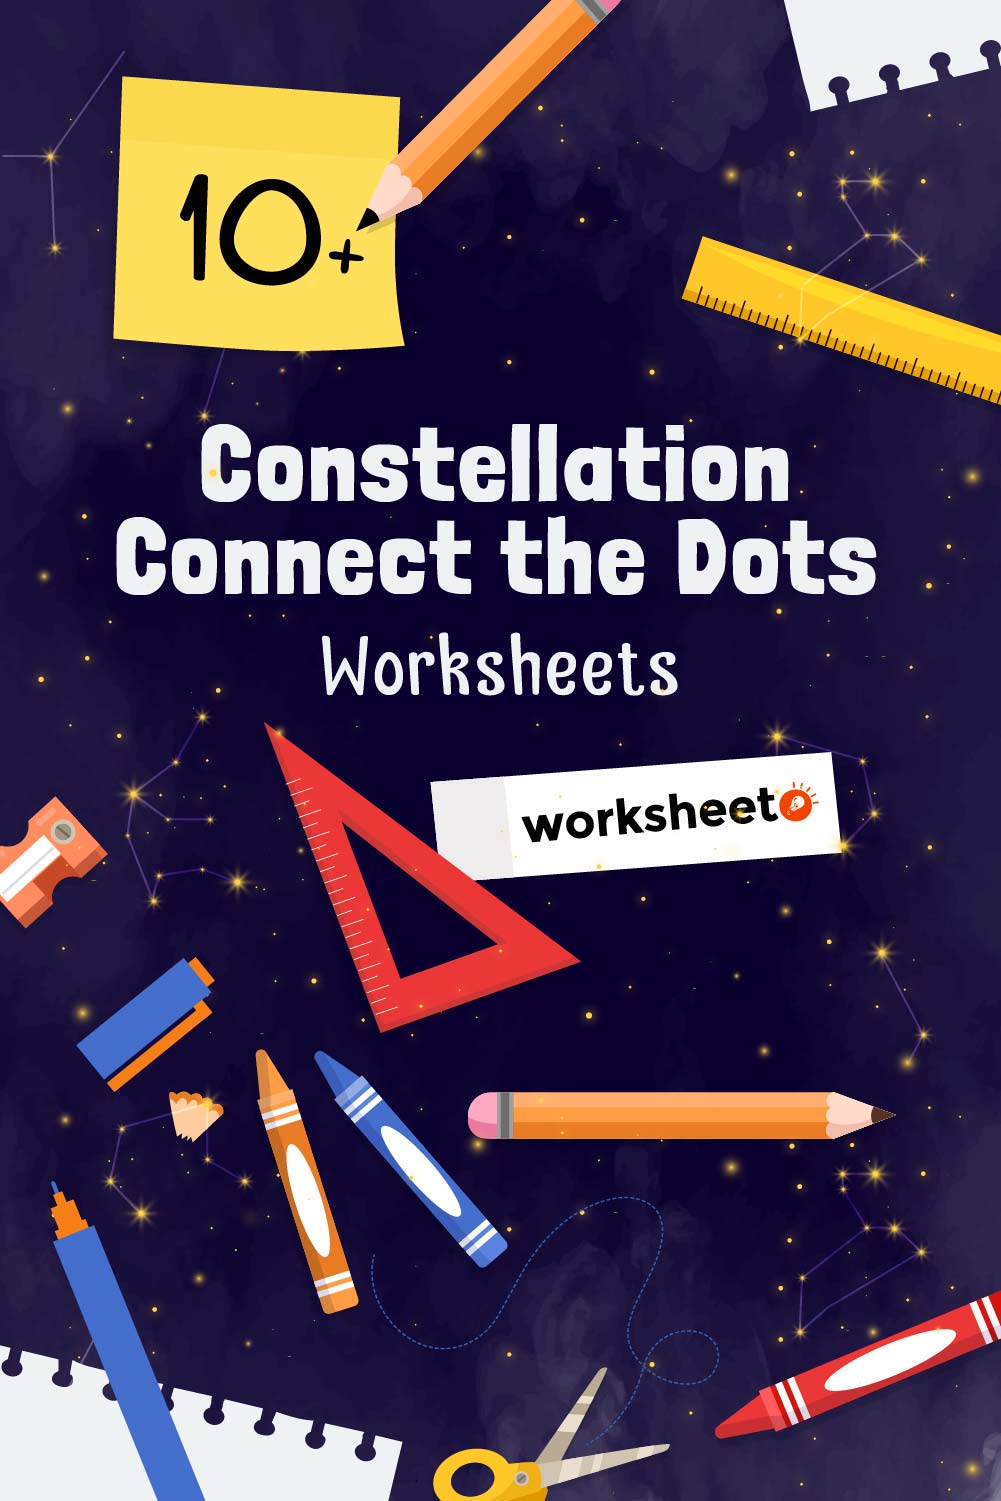 6 Images of Constellation Connect The Dots Worksheet